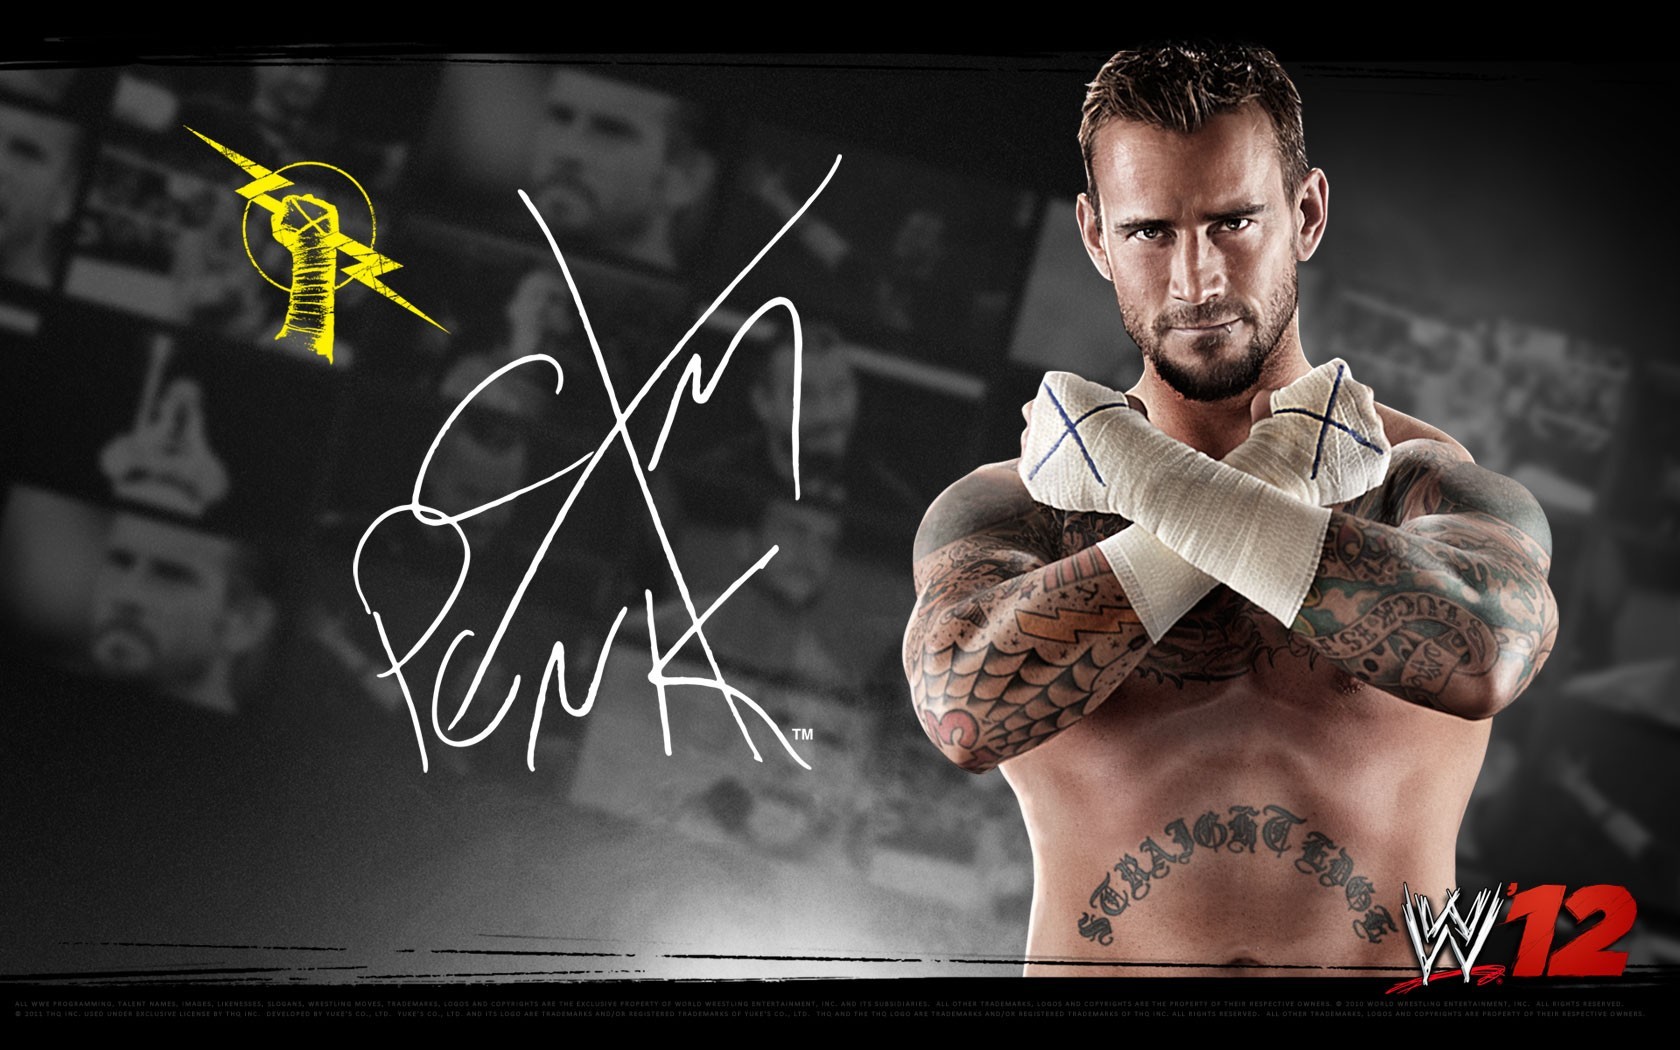 TV Show WWE HD Wallpaper | Background Image